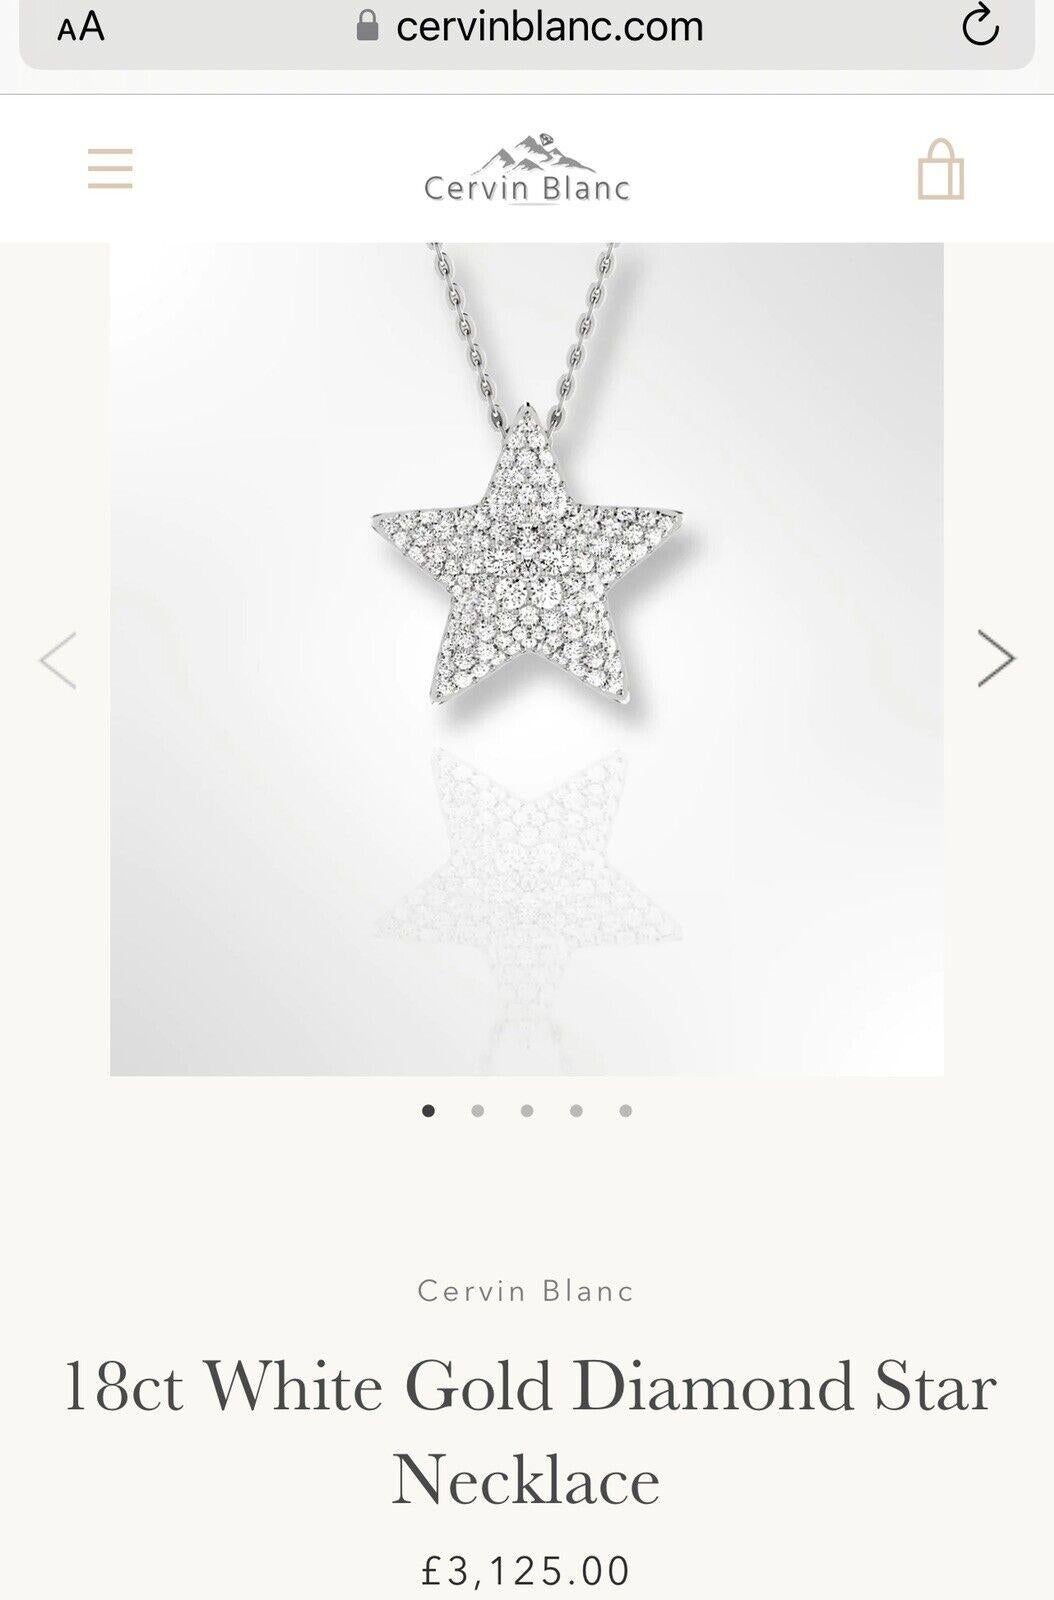 A divine piece of fine jewellery from luxury Swiss brand all the way from fairytale alps of Gstaad Switzerland

True classic jewellery staple for a stylish addition to an outfit

This necklace is part of designers “Star for a Star” Diamond